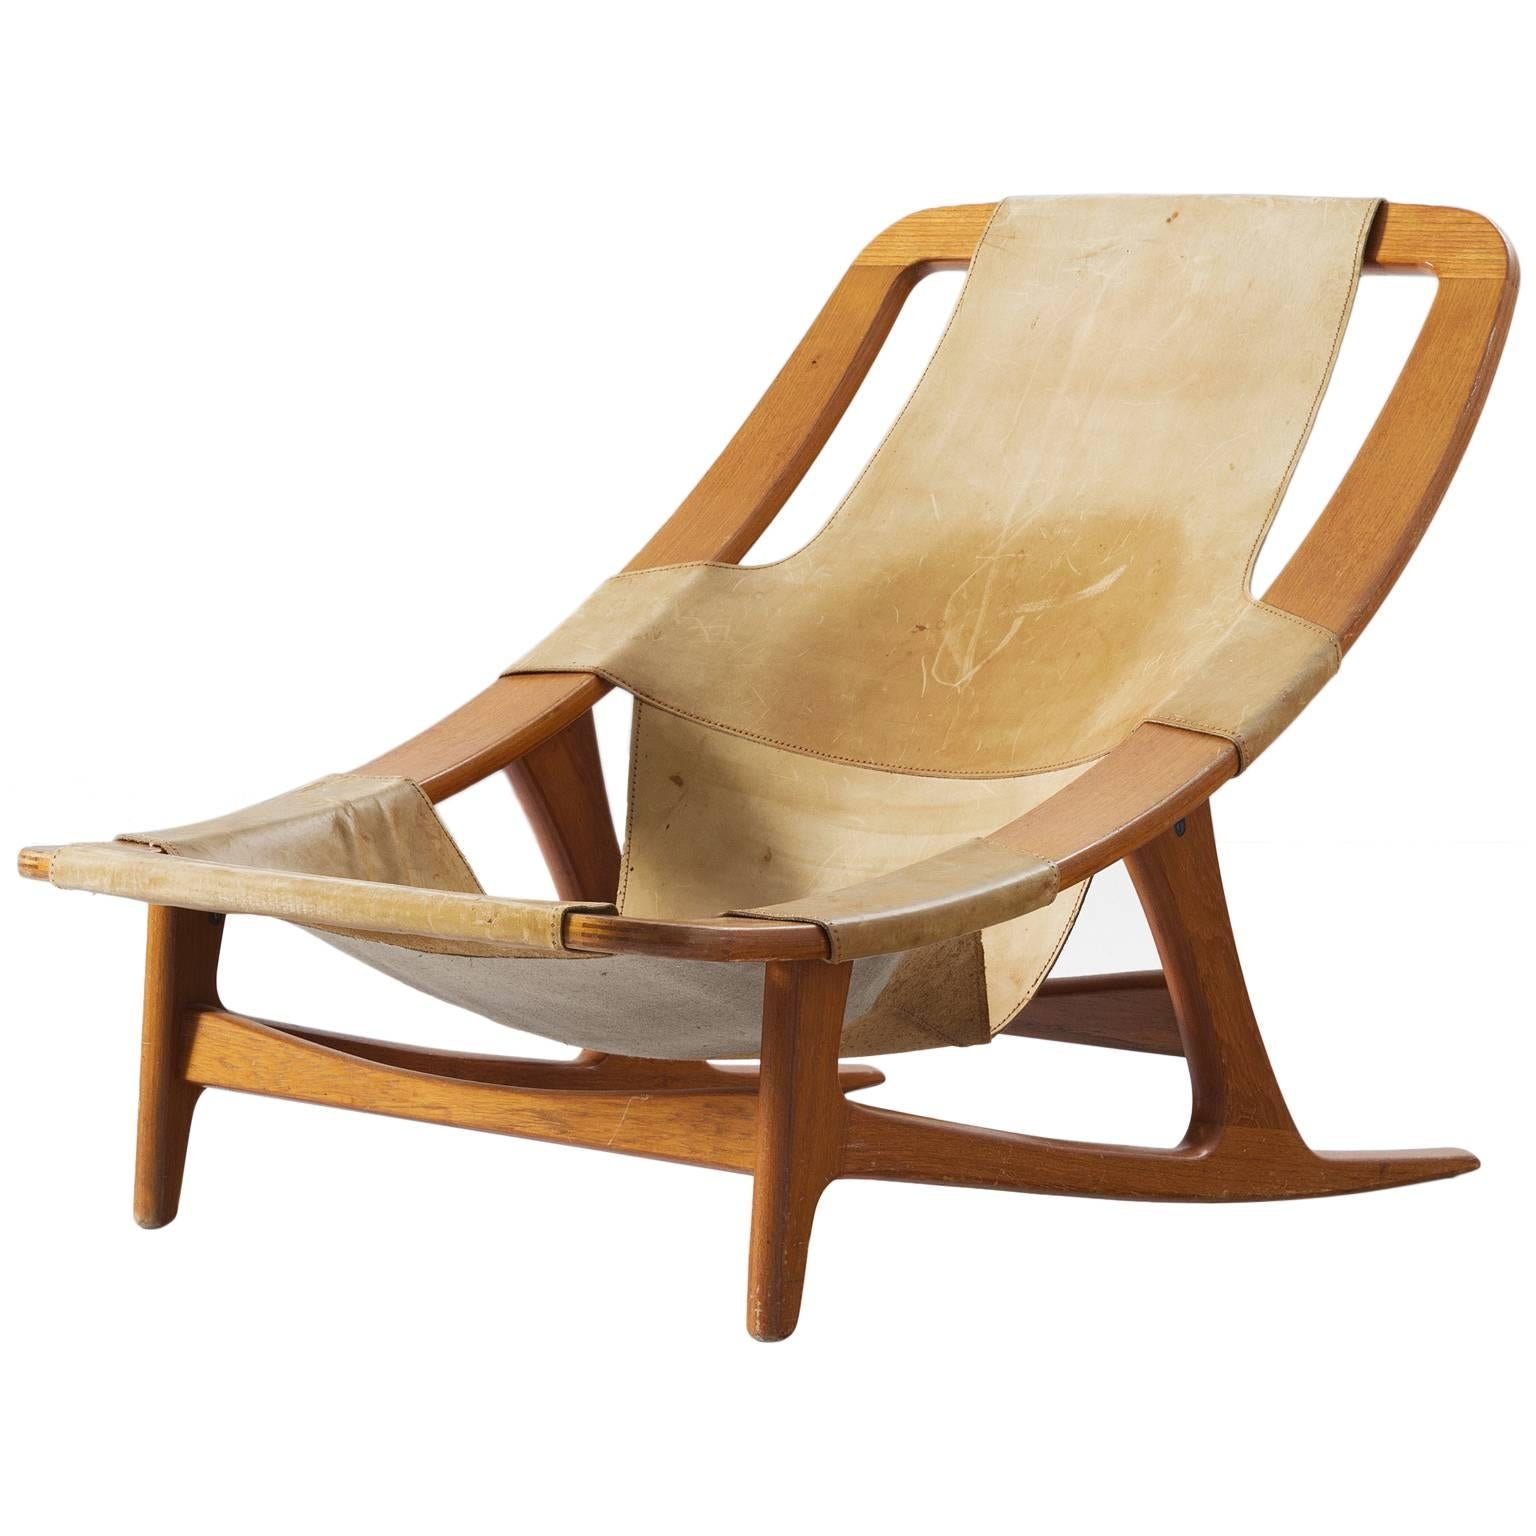 Arne Tidemand Ruud Lounge Chair in Teak and Natural Leather